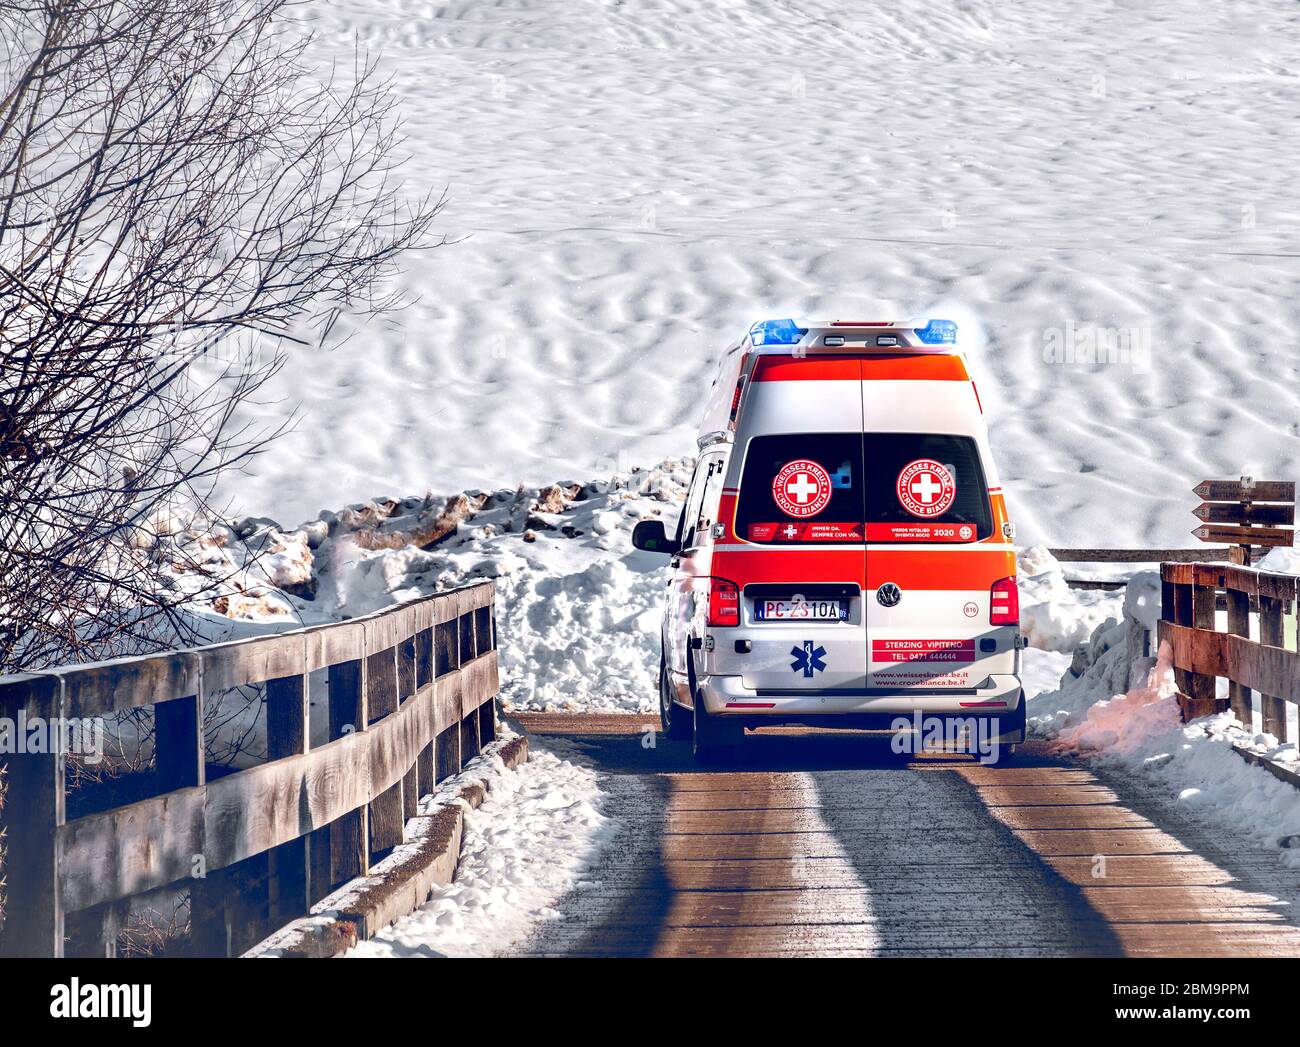 snow emergency ambulance with in winter snow background road Stock Photo